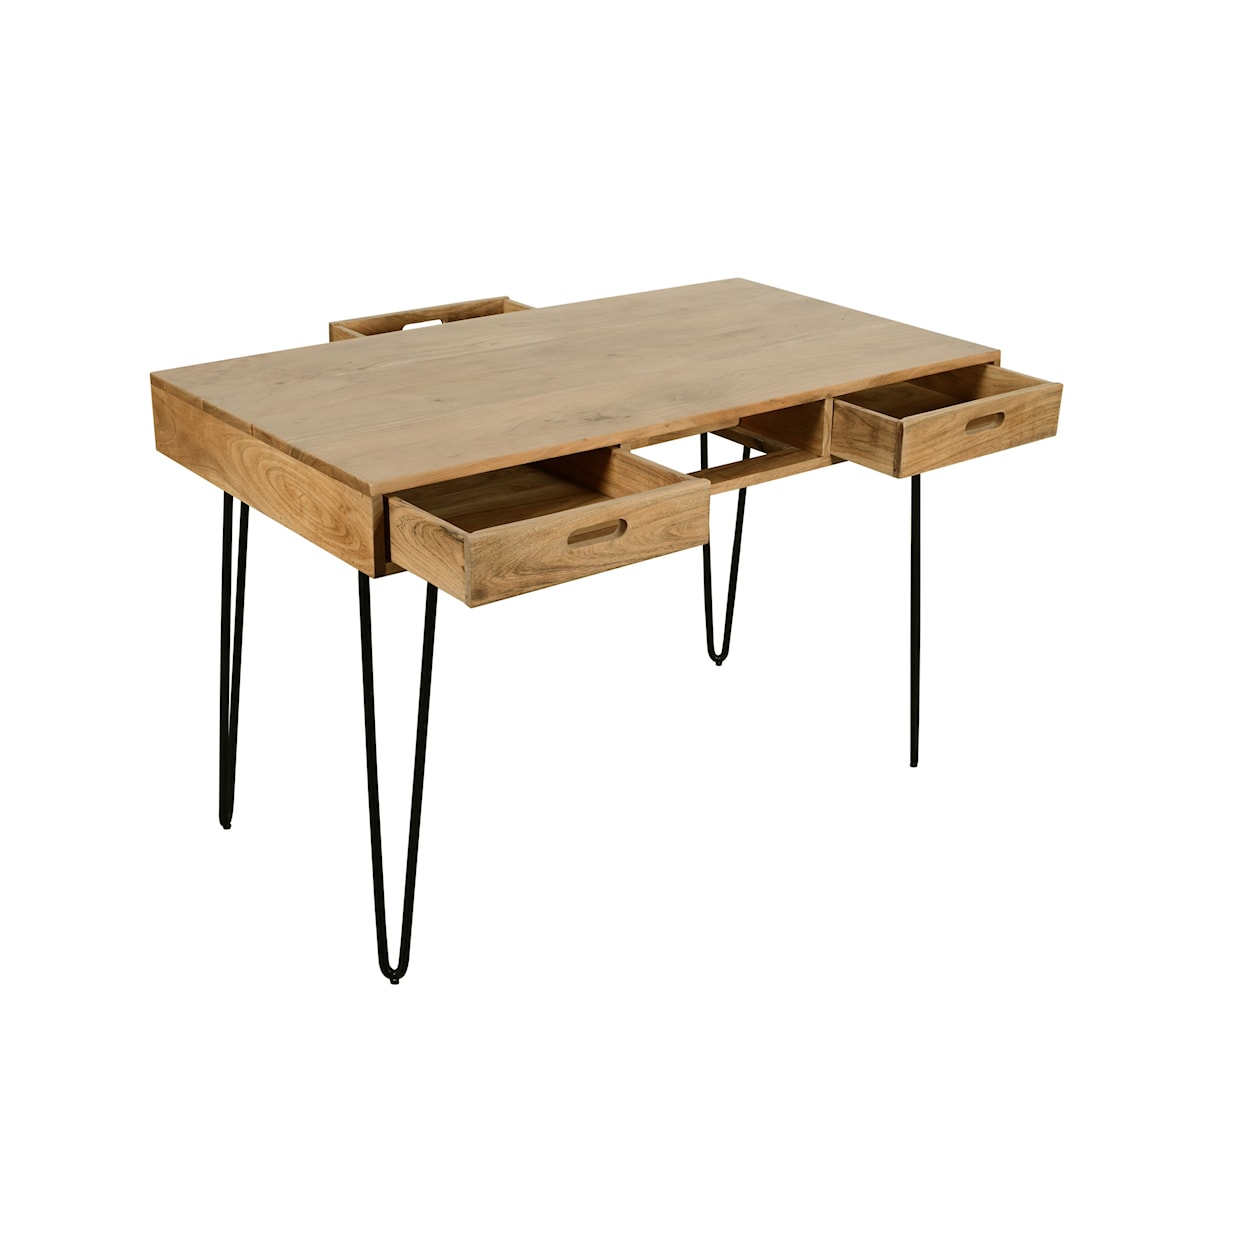 VFM Signature Rollins Counter Height Dining Table